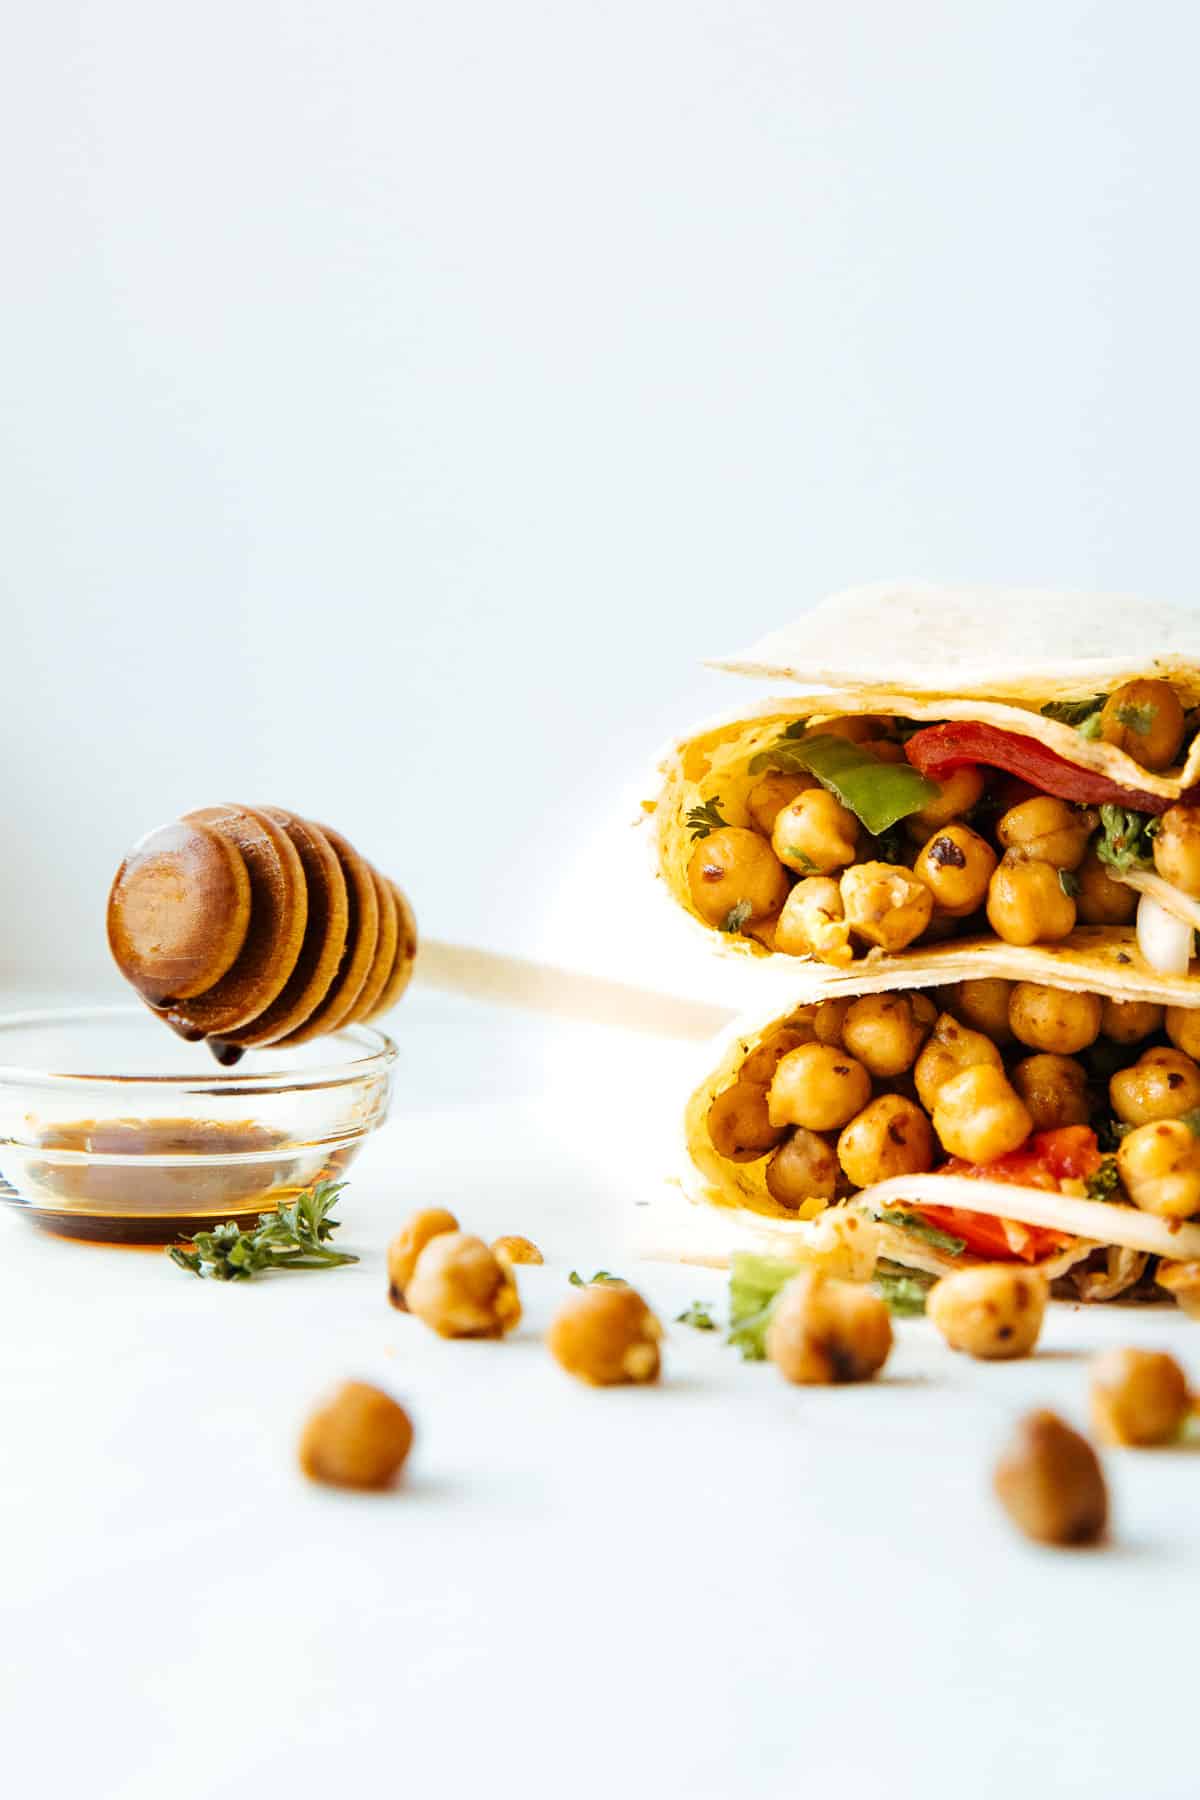 turkish chickpea wraps from the side